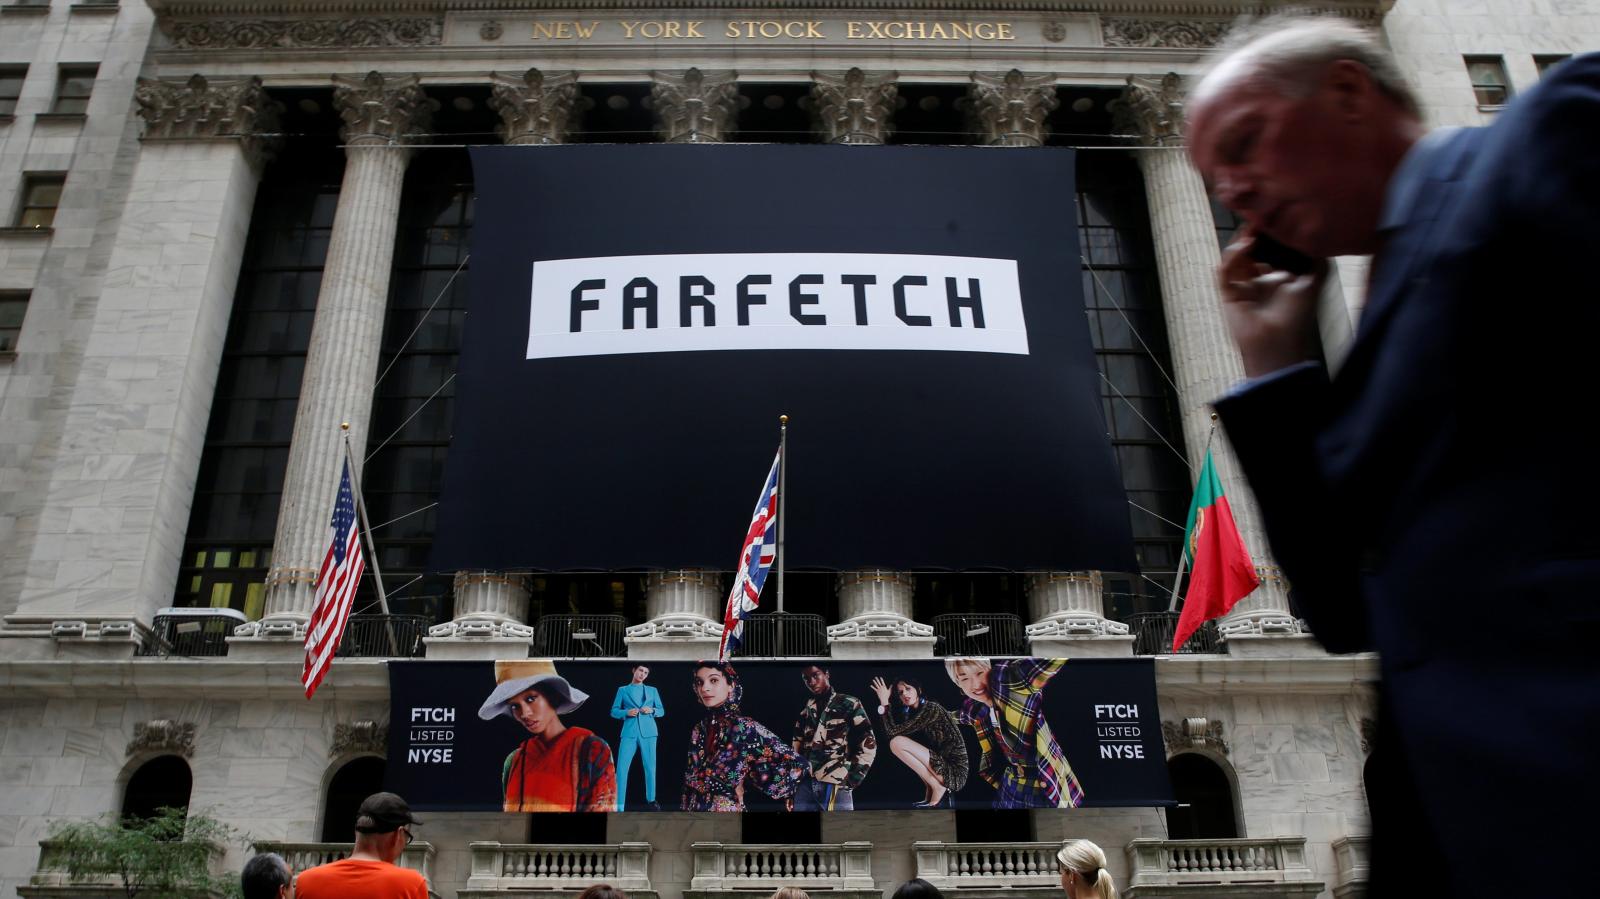 Farfetch's Deal With OFF-WHITE™ Will Run Through At Least 2026